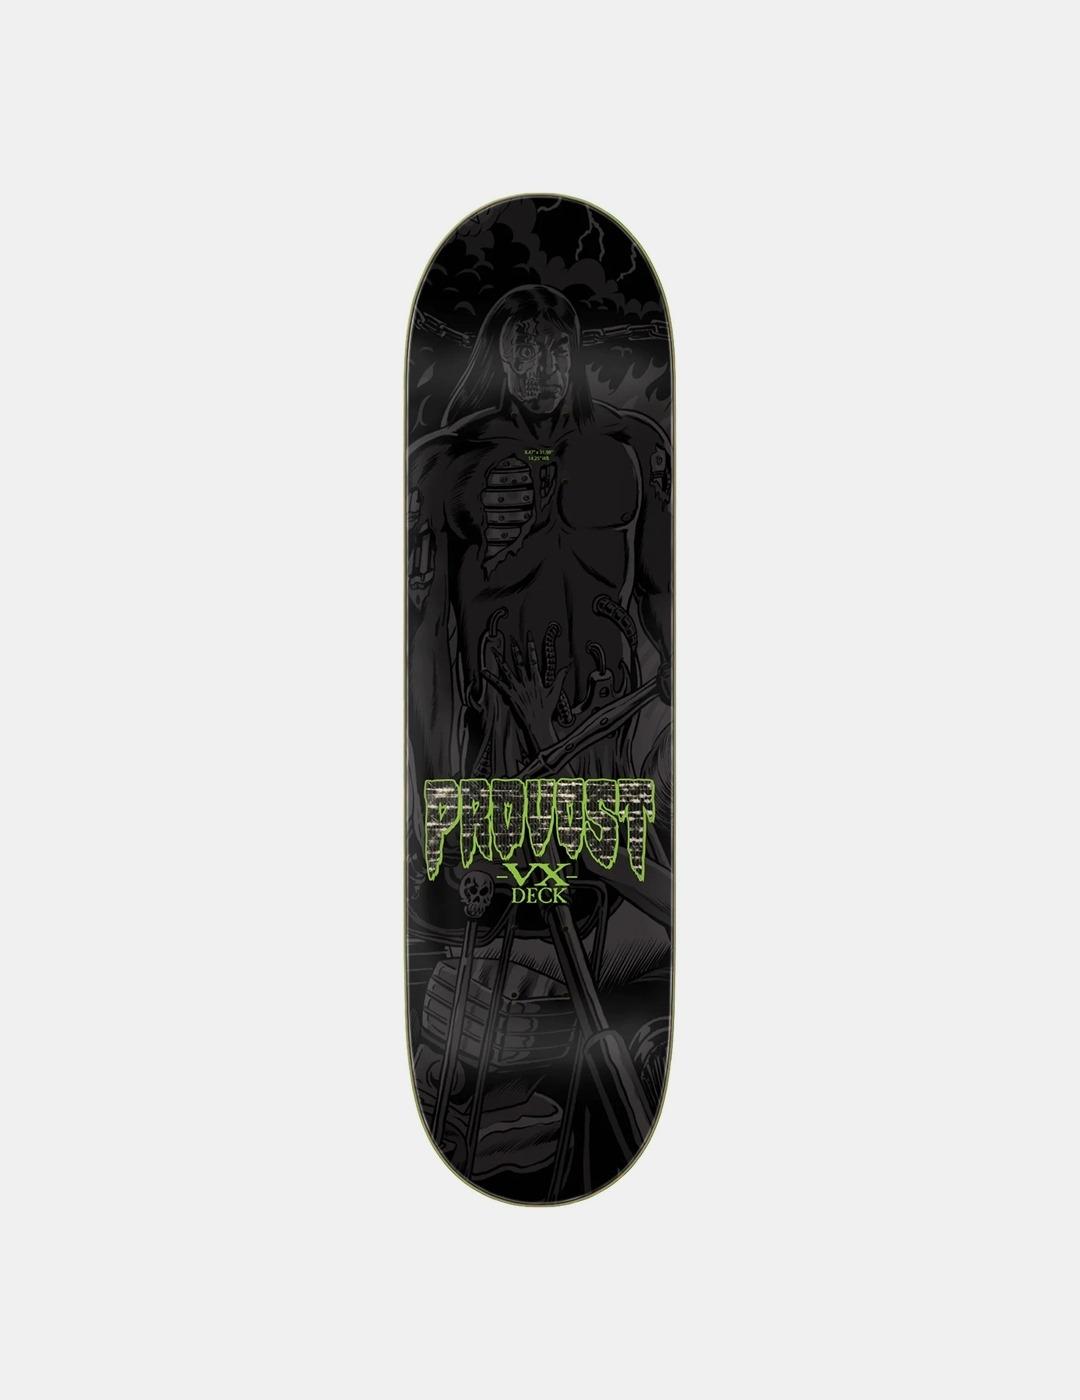 Table Creature Provost Hellbound Vx 8.47x31.98